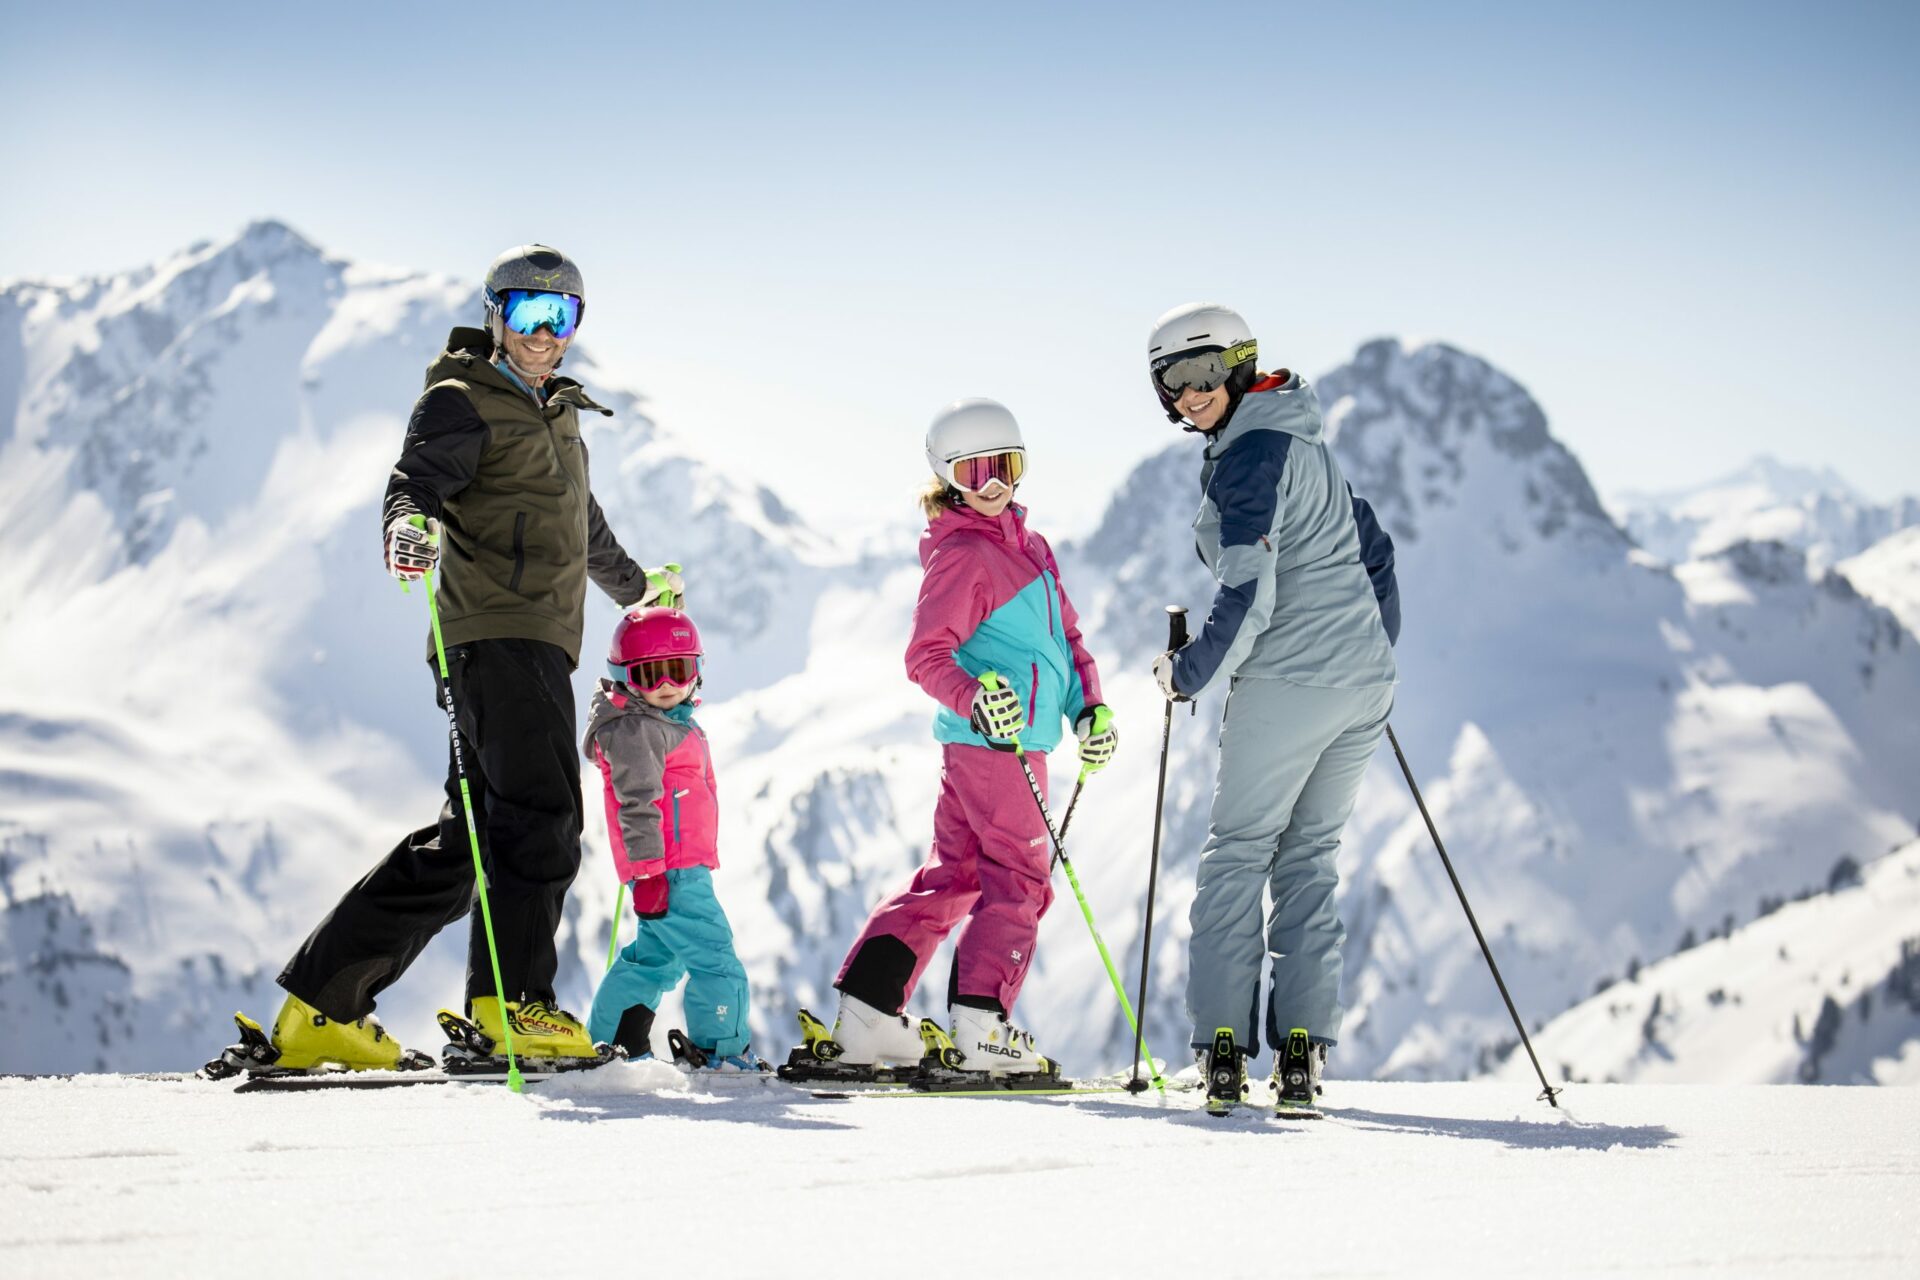 A family on skis standing on top of a mountain.